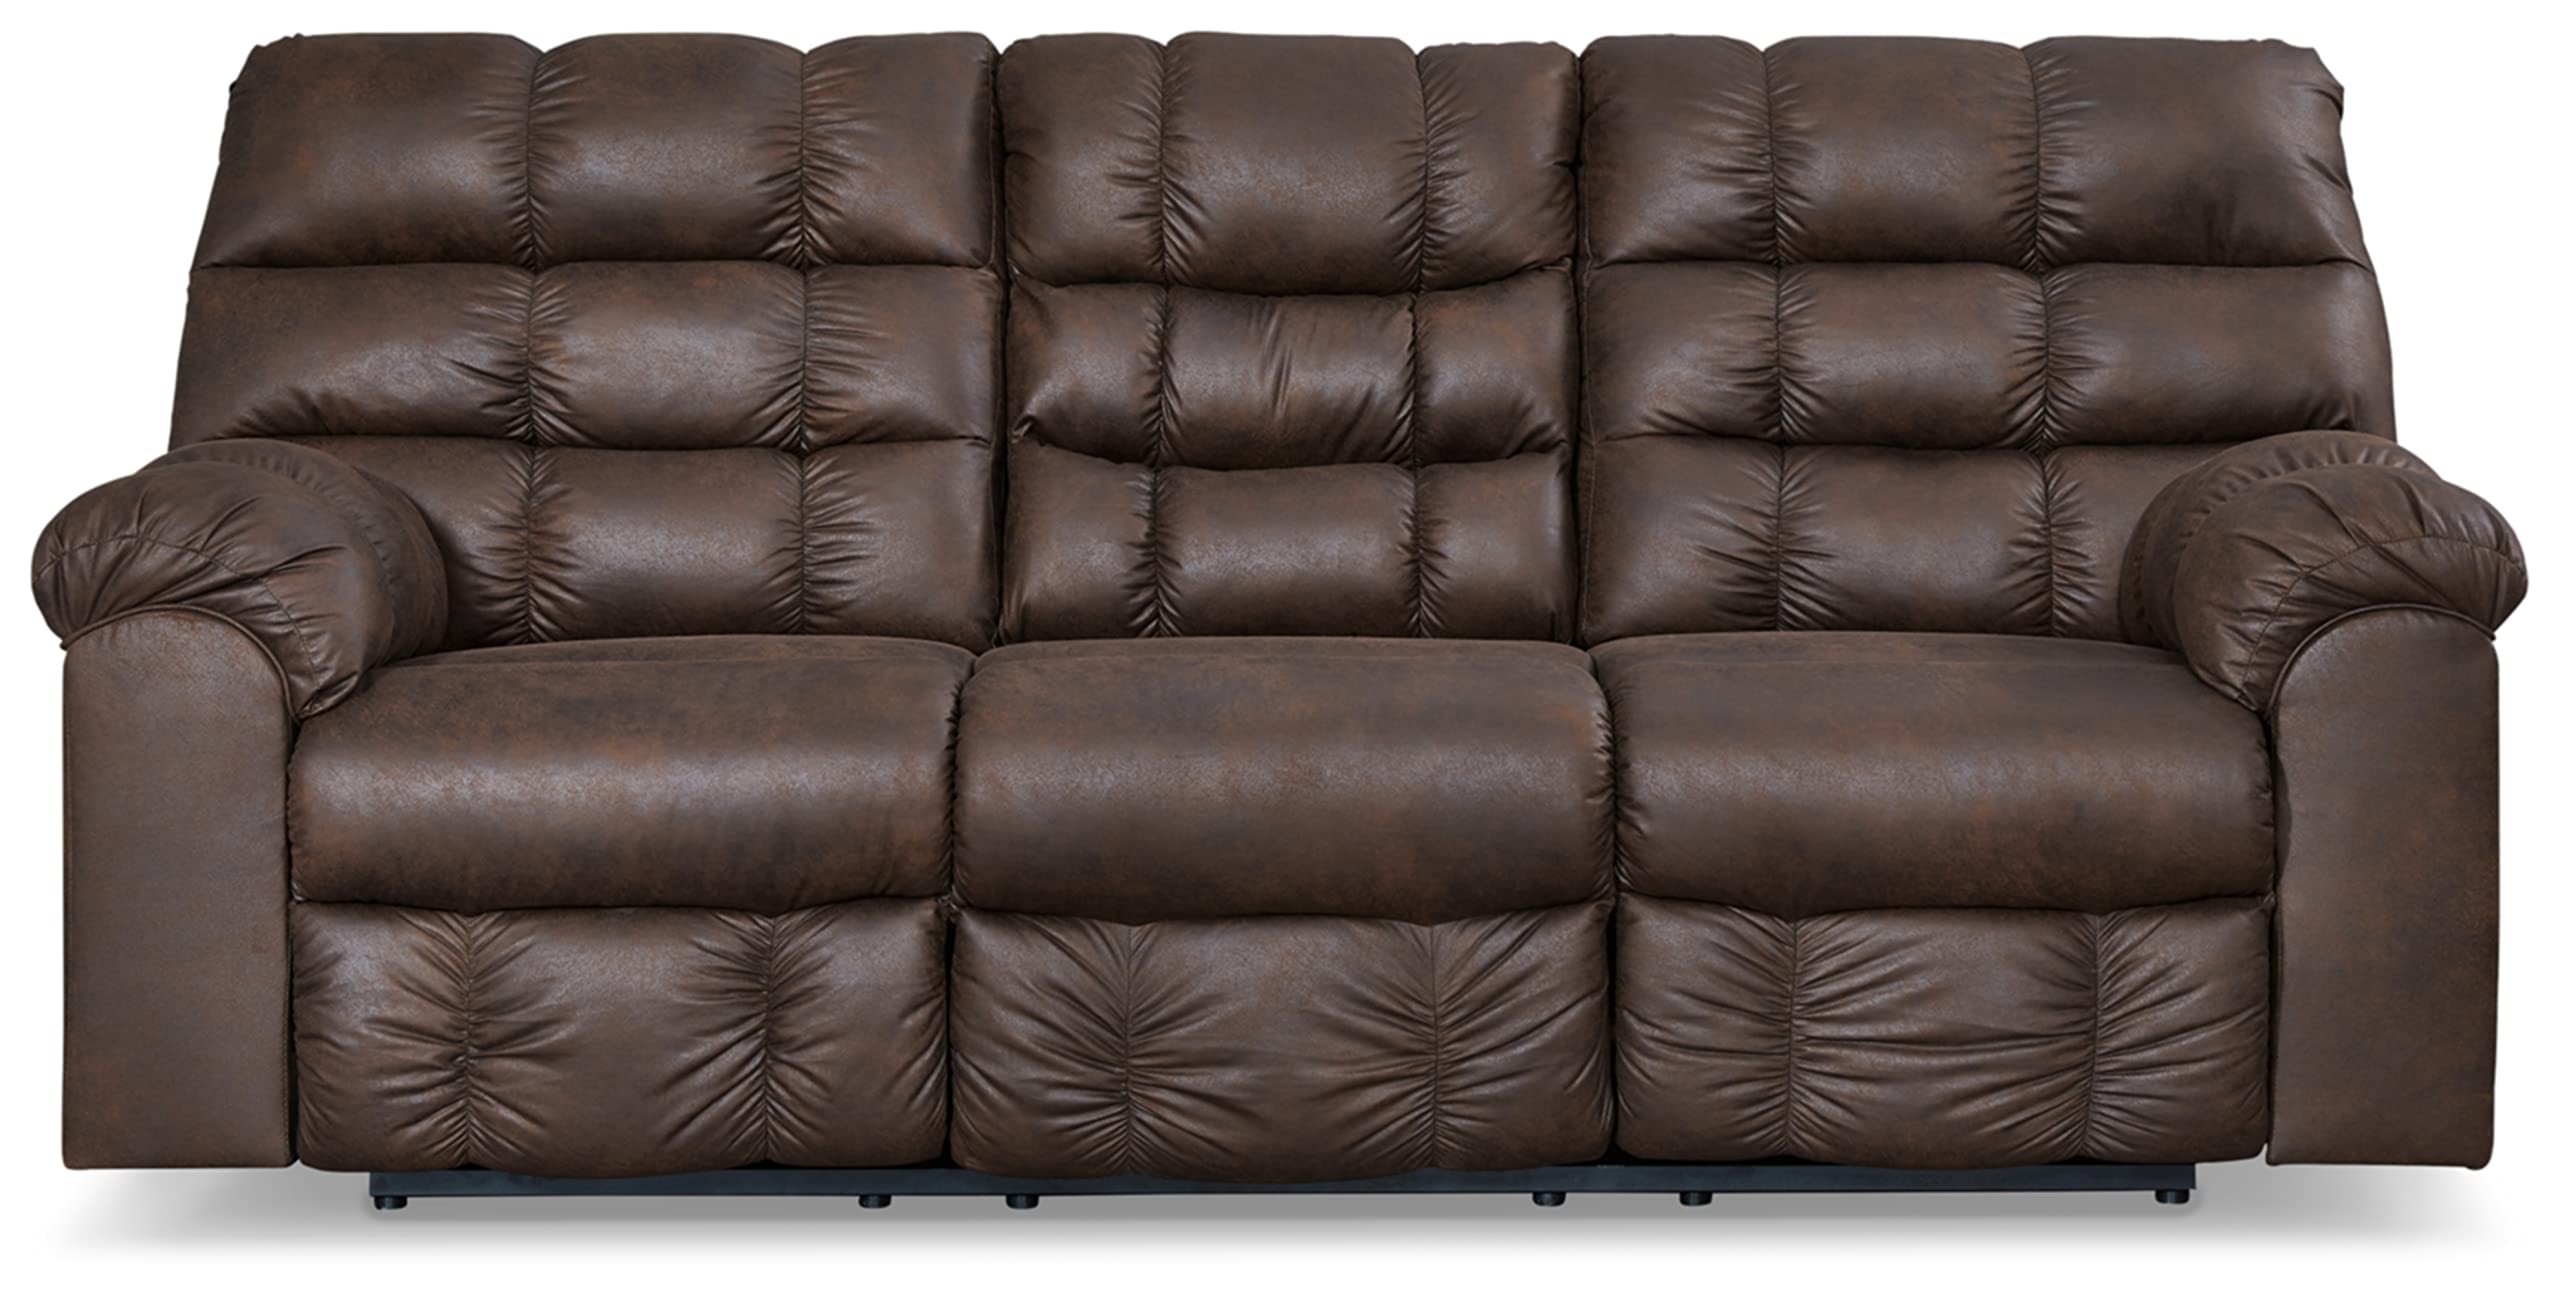 Signature Design by Ashley Derwin Urban Faux Leather Tufted Reclining Sofa with Drop Down Table, Dark Brown